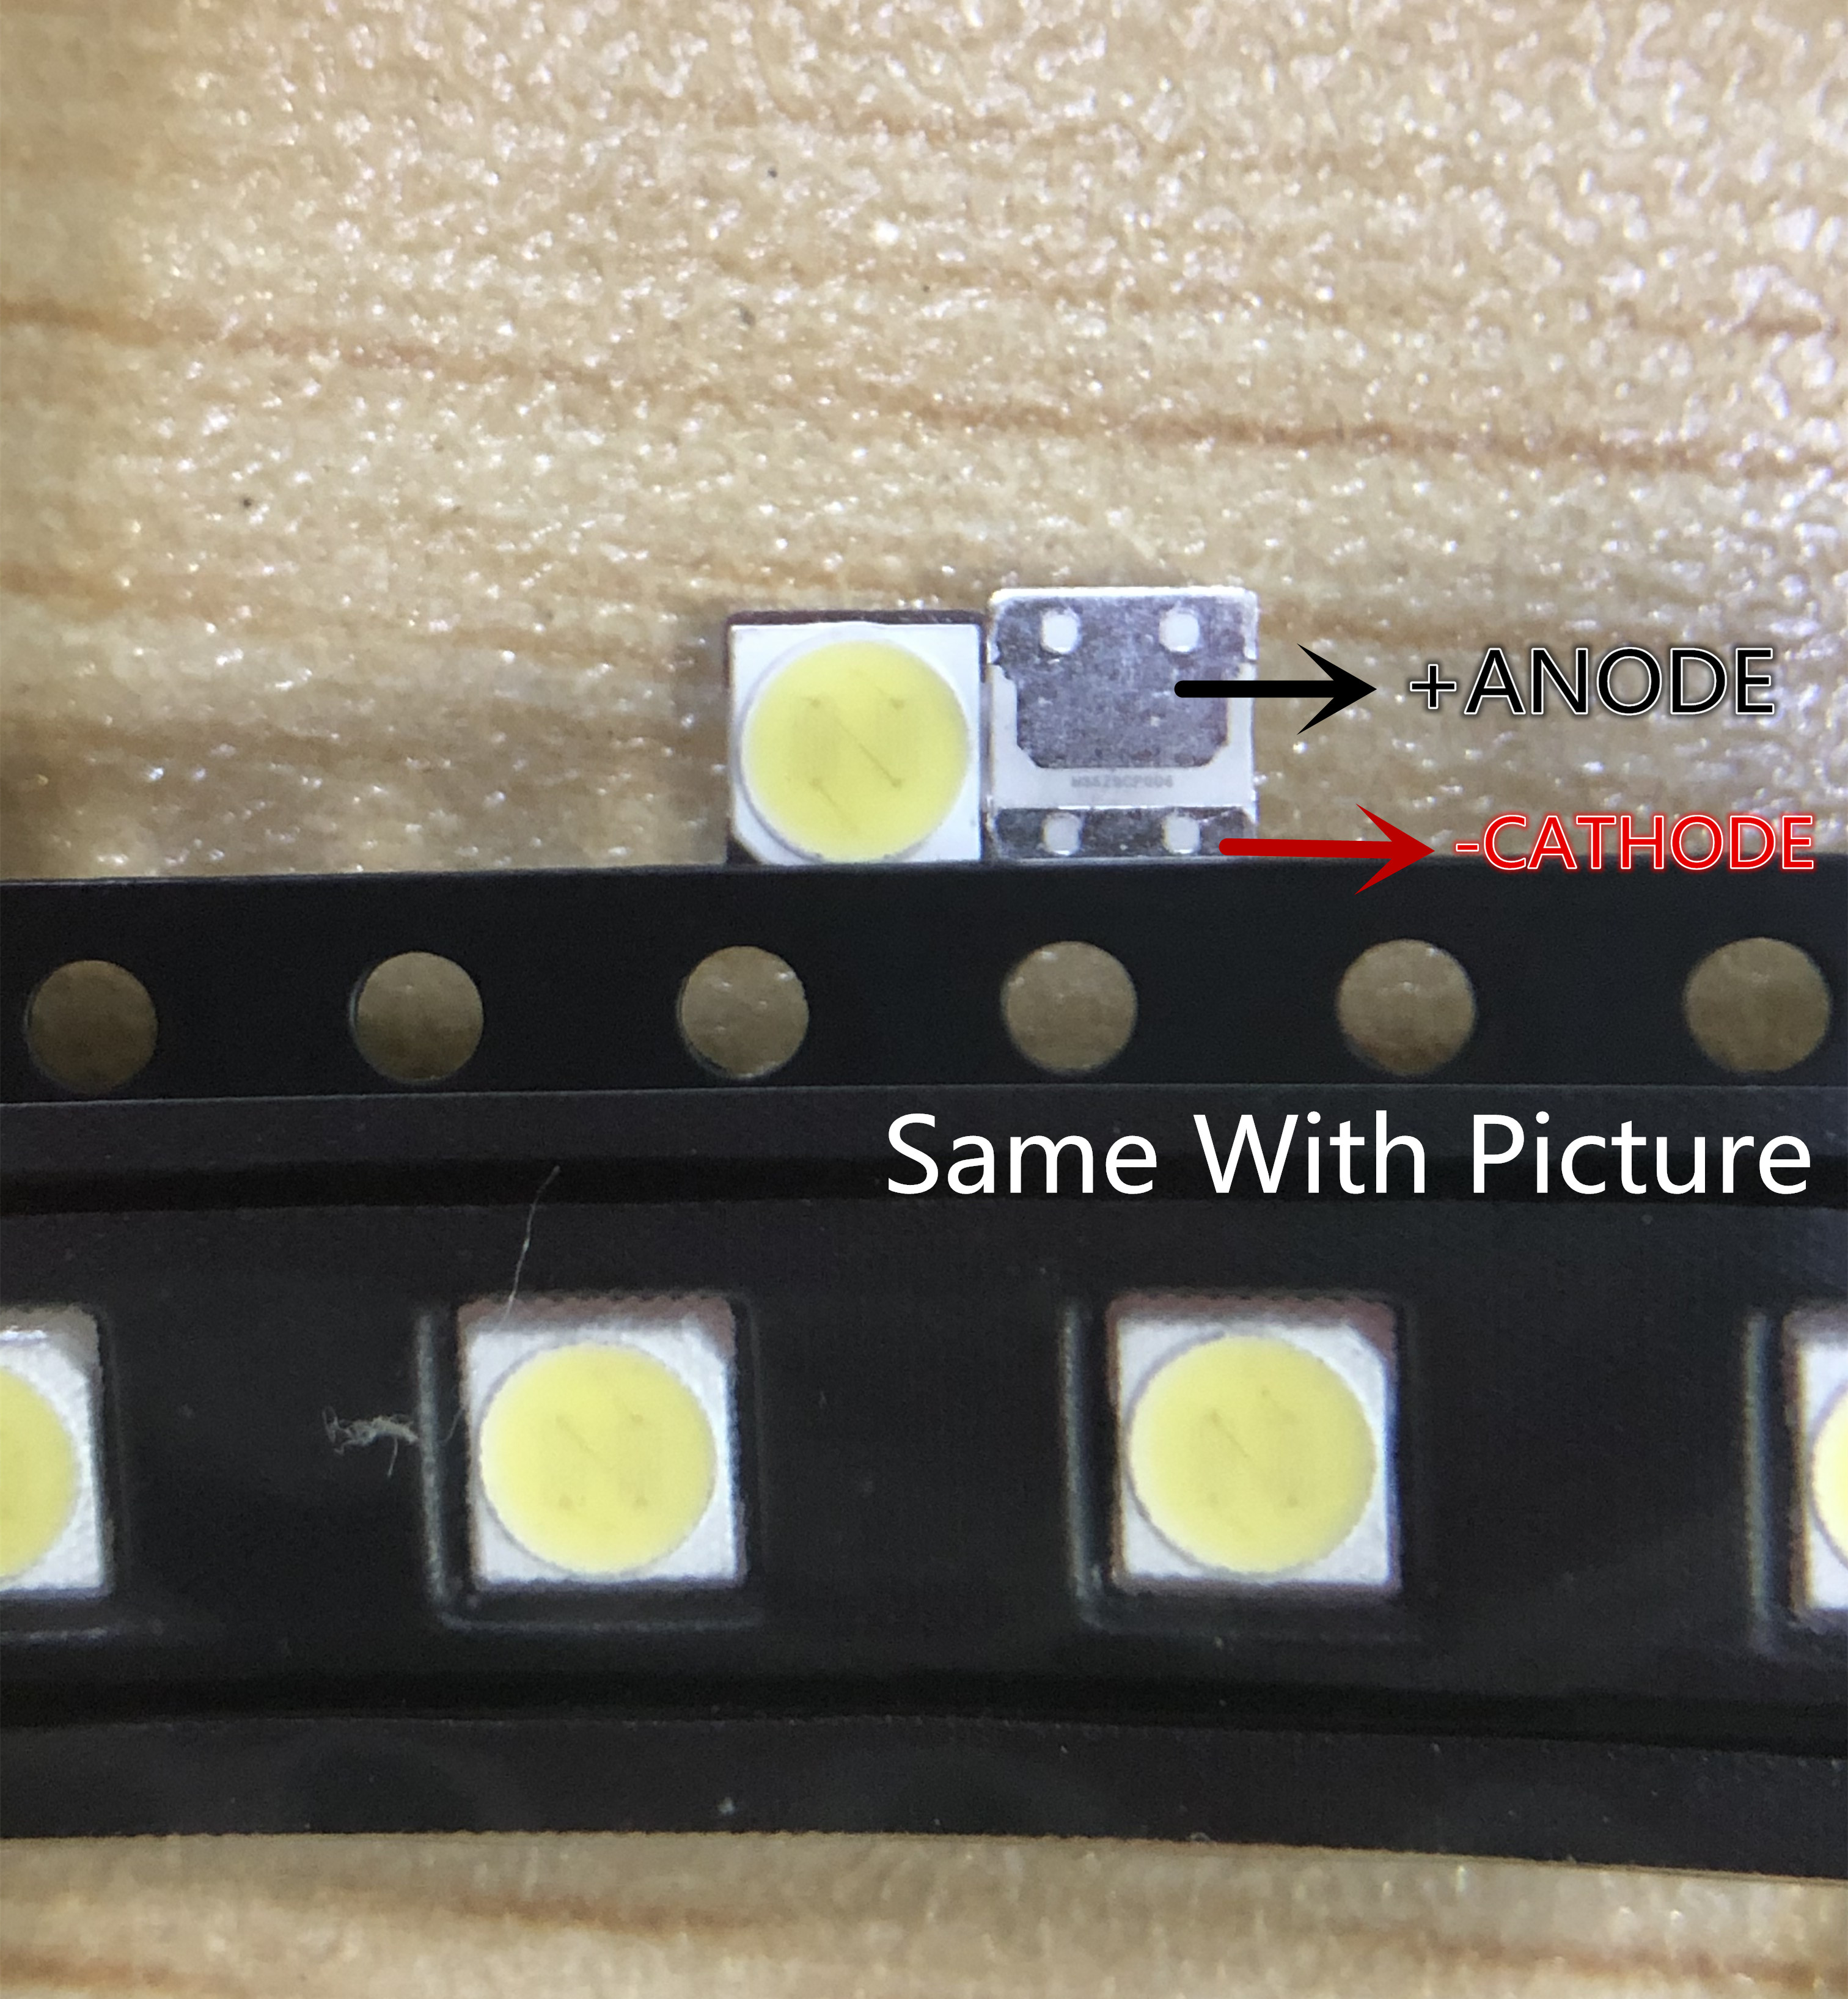 FOR LCD TV repair LG led TV backlight strip lights with light-emitting diode 3535 SMD LED beads 6V LG 2W Old Type